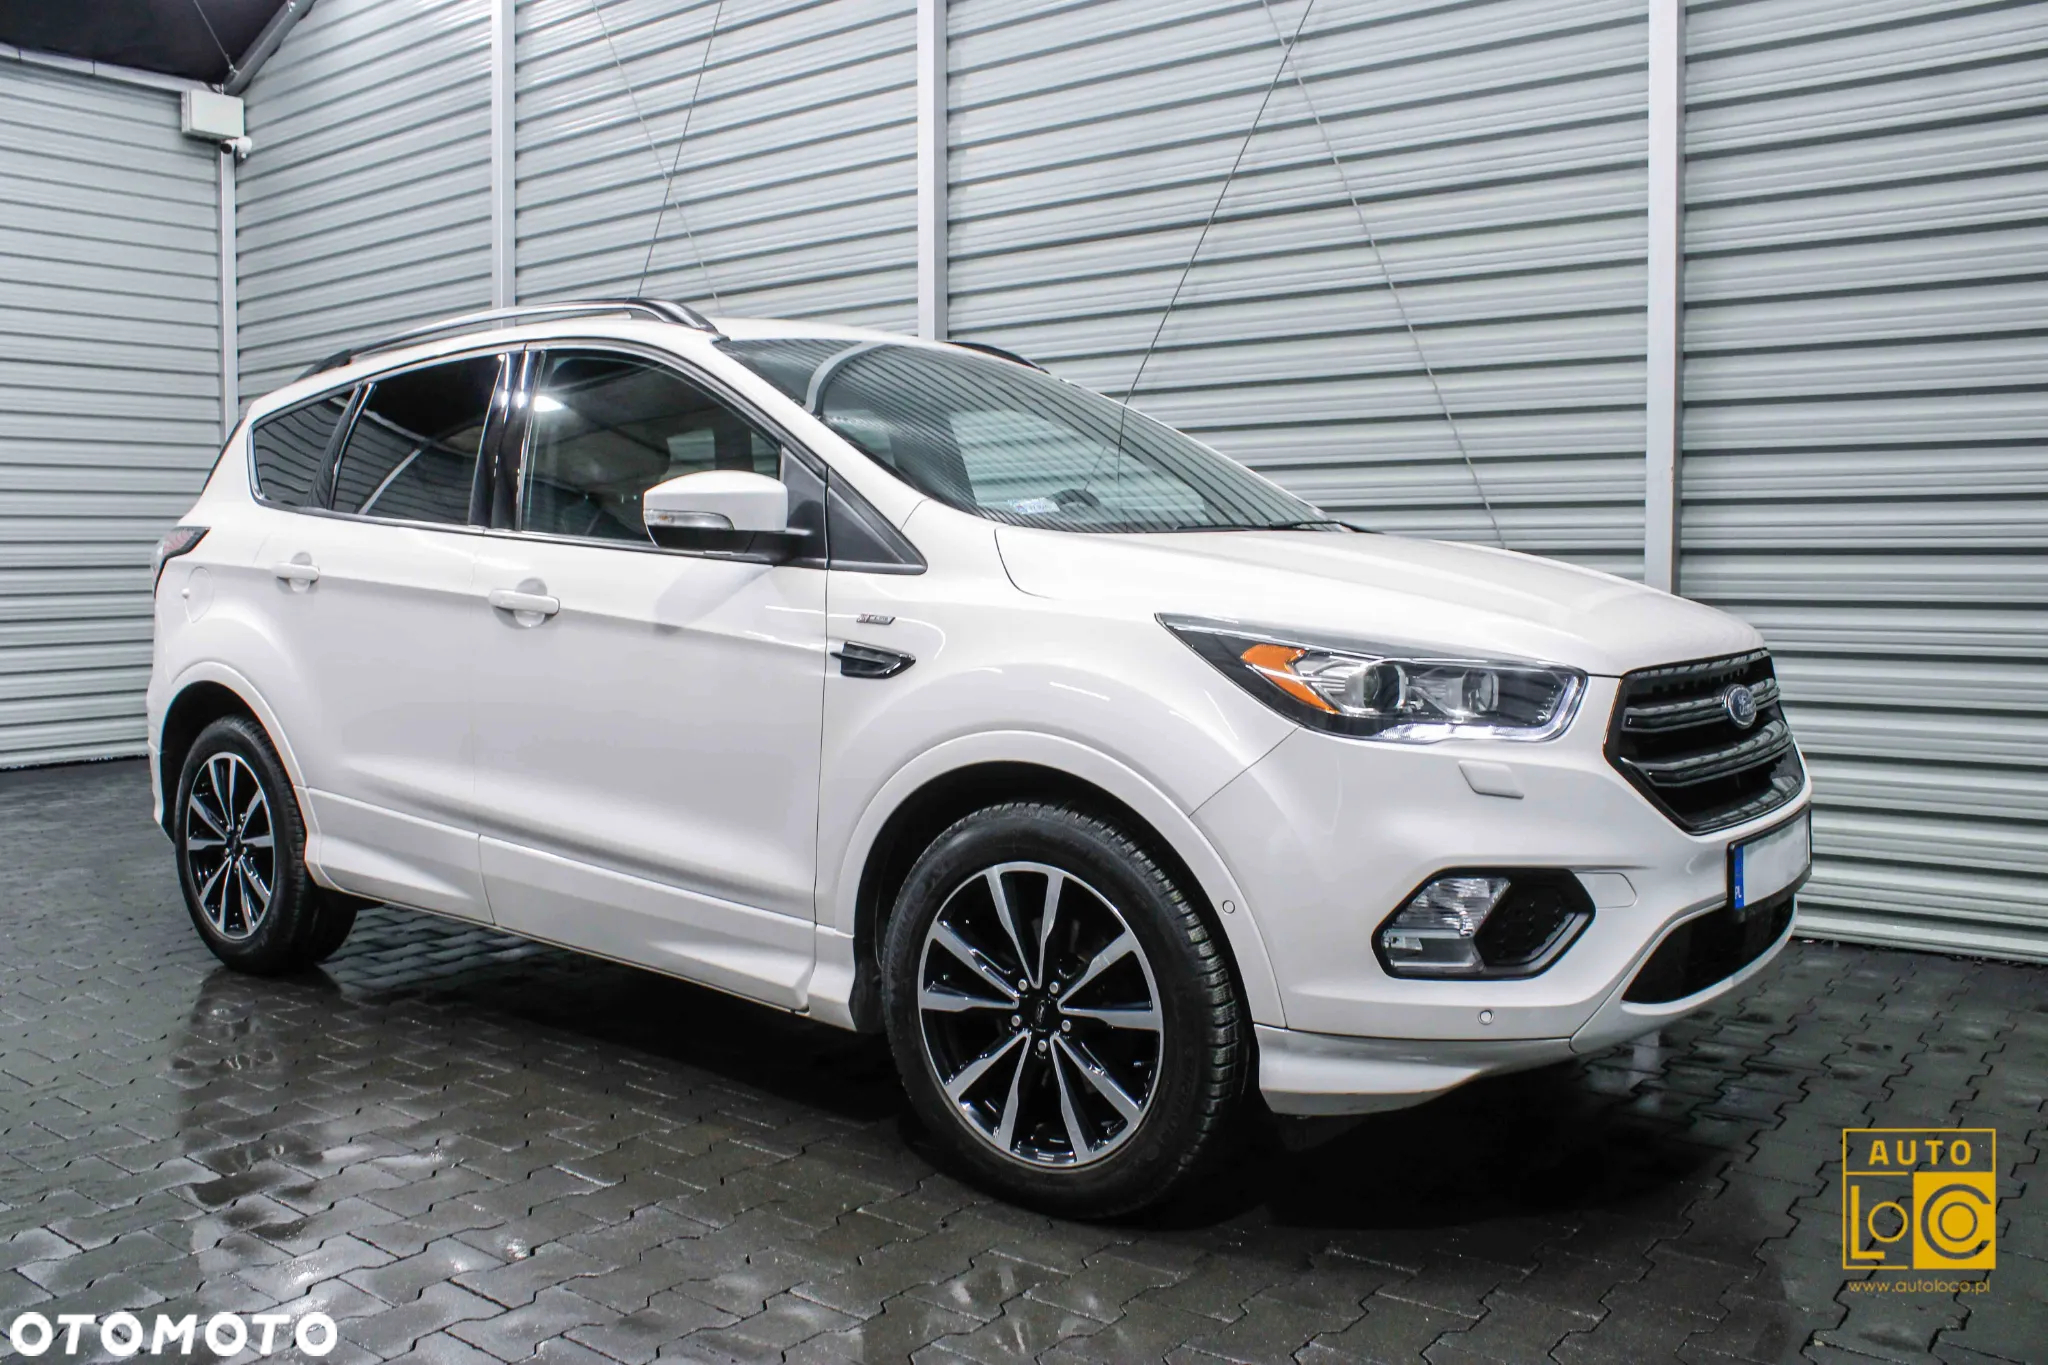 Ford Kuga 1.5 EcoBoost FWD ST-Line ASS - 7